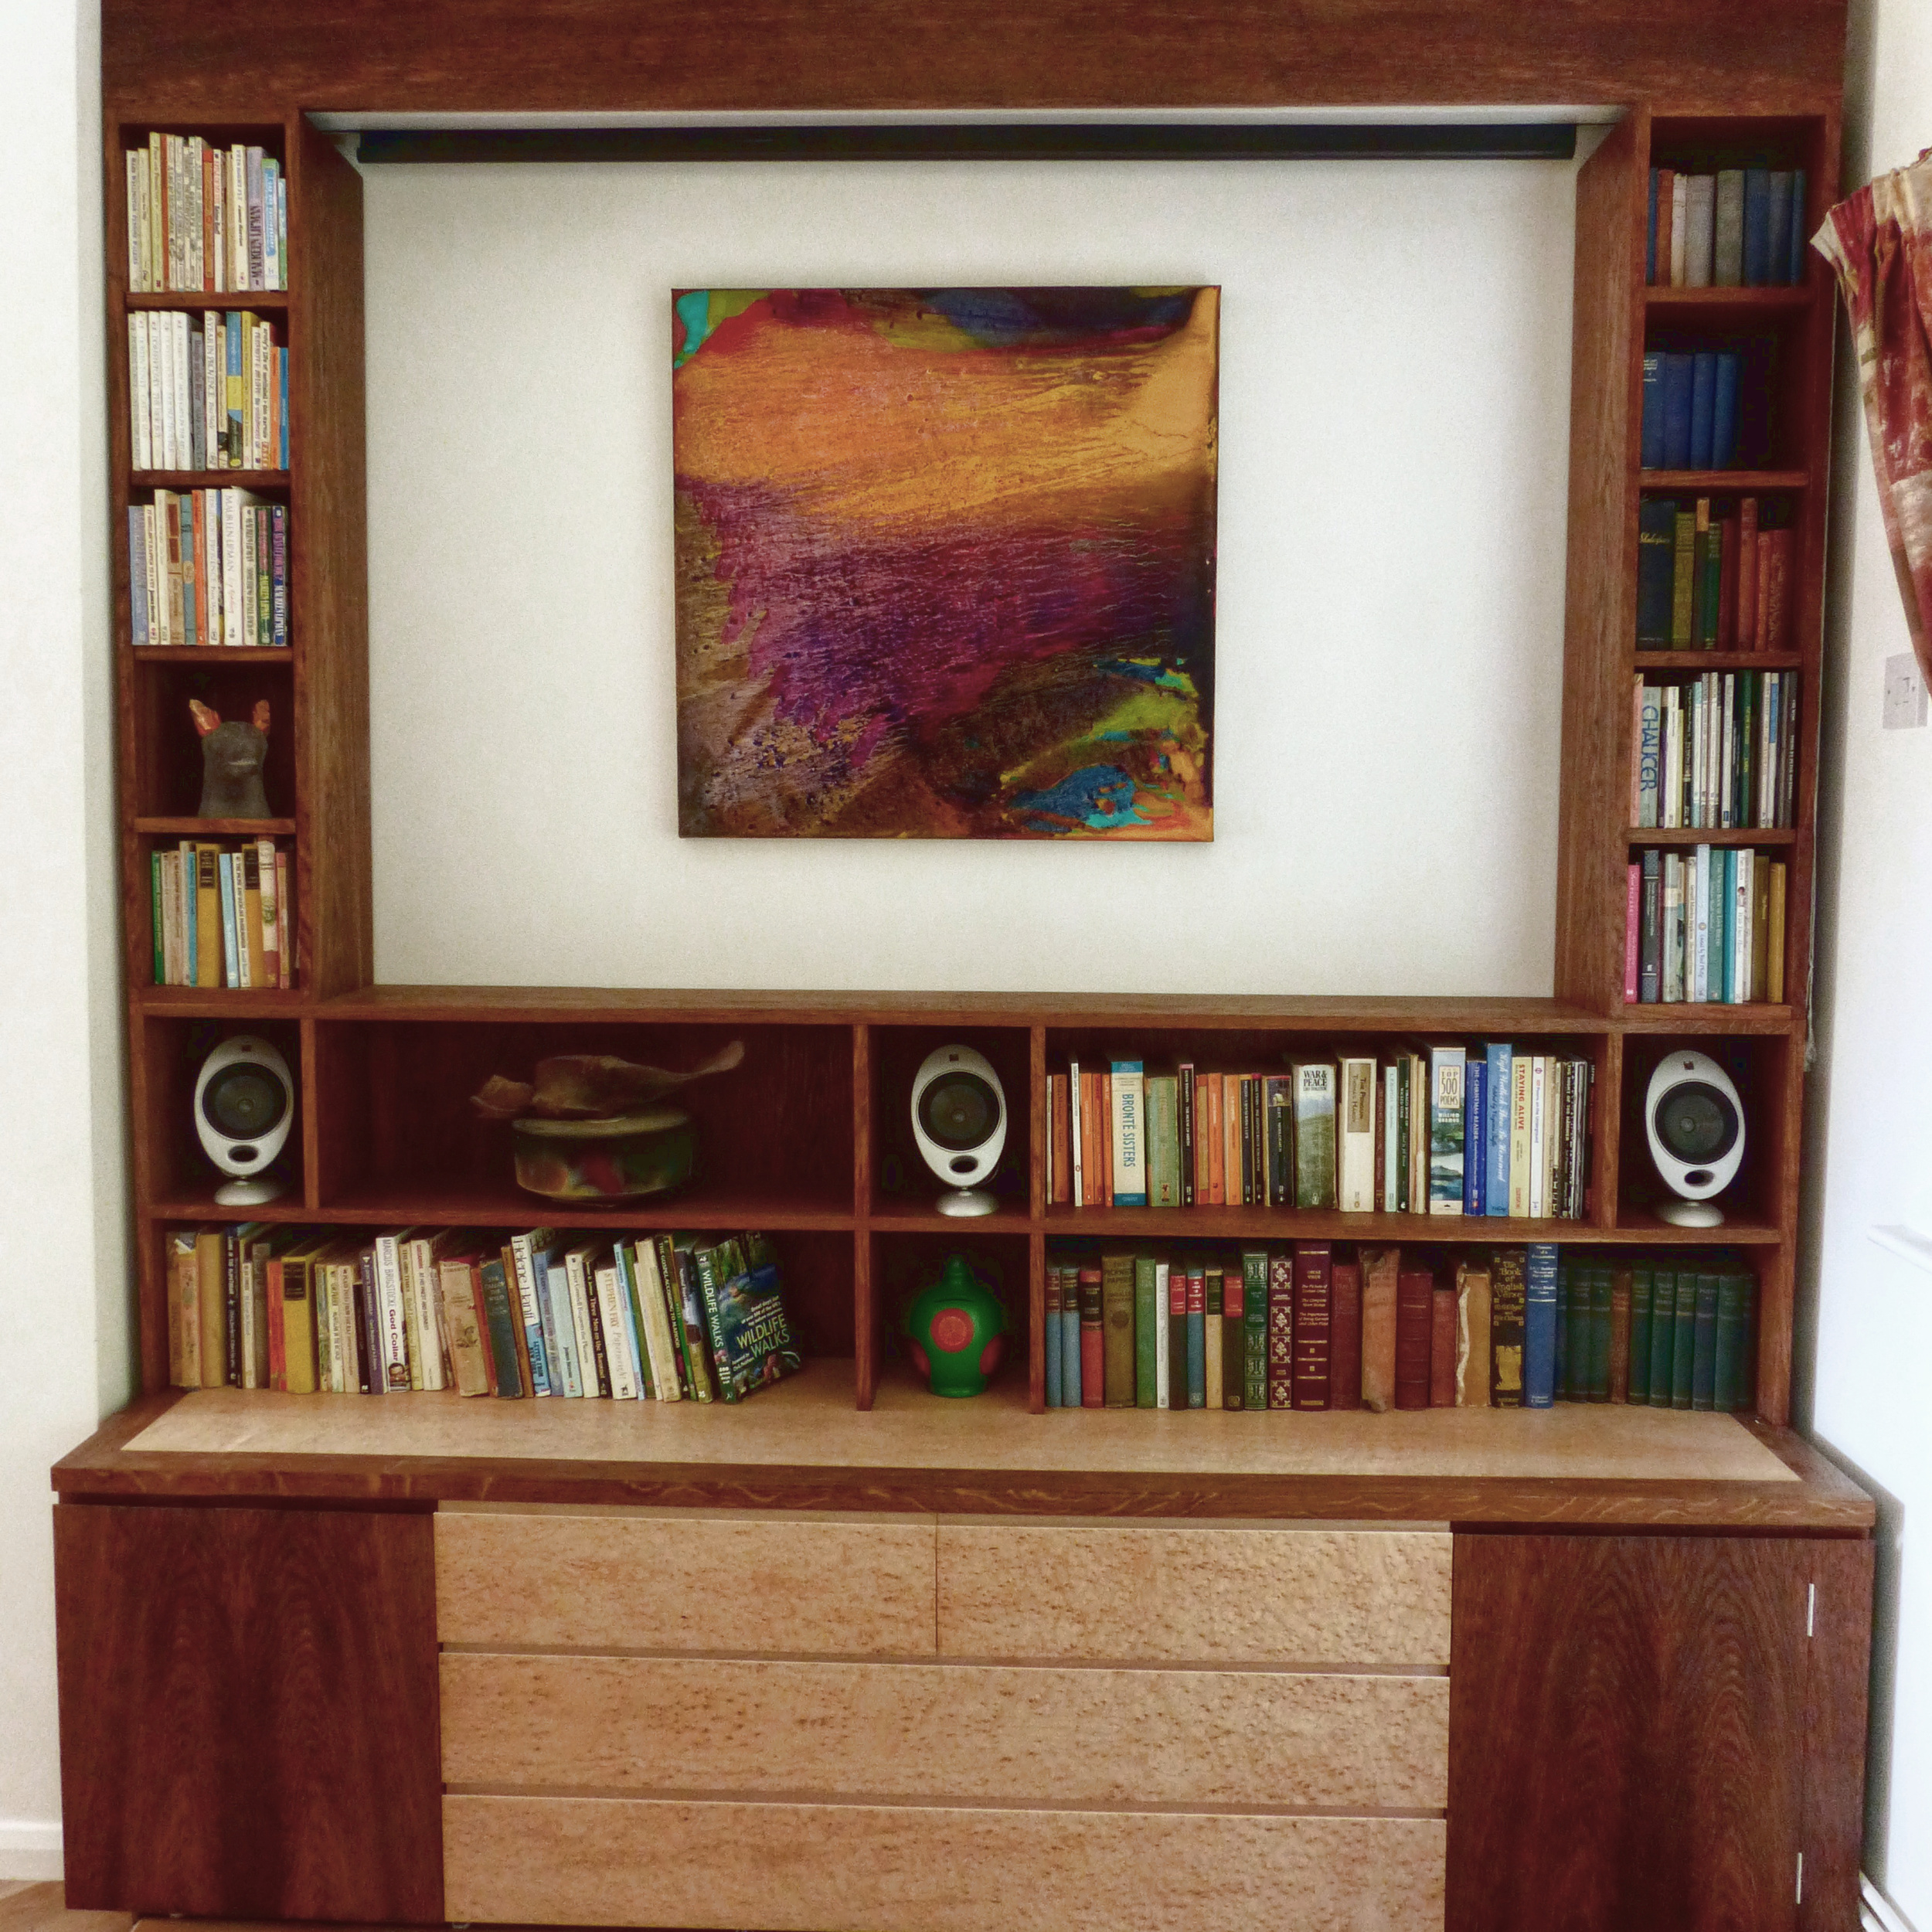 The Vatch Projector/Media Cabinet